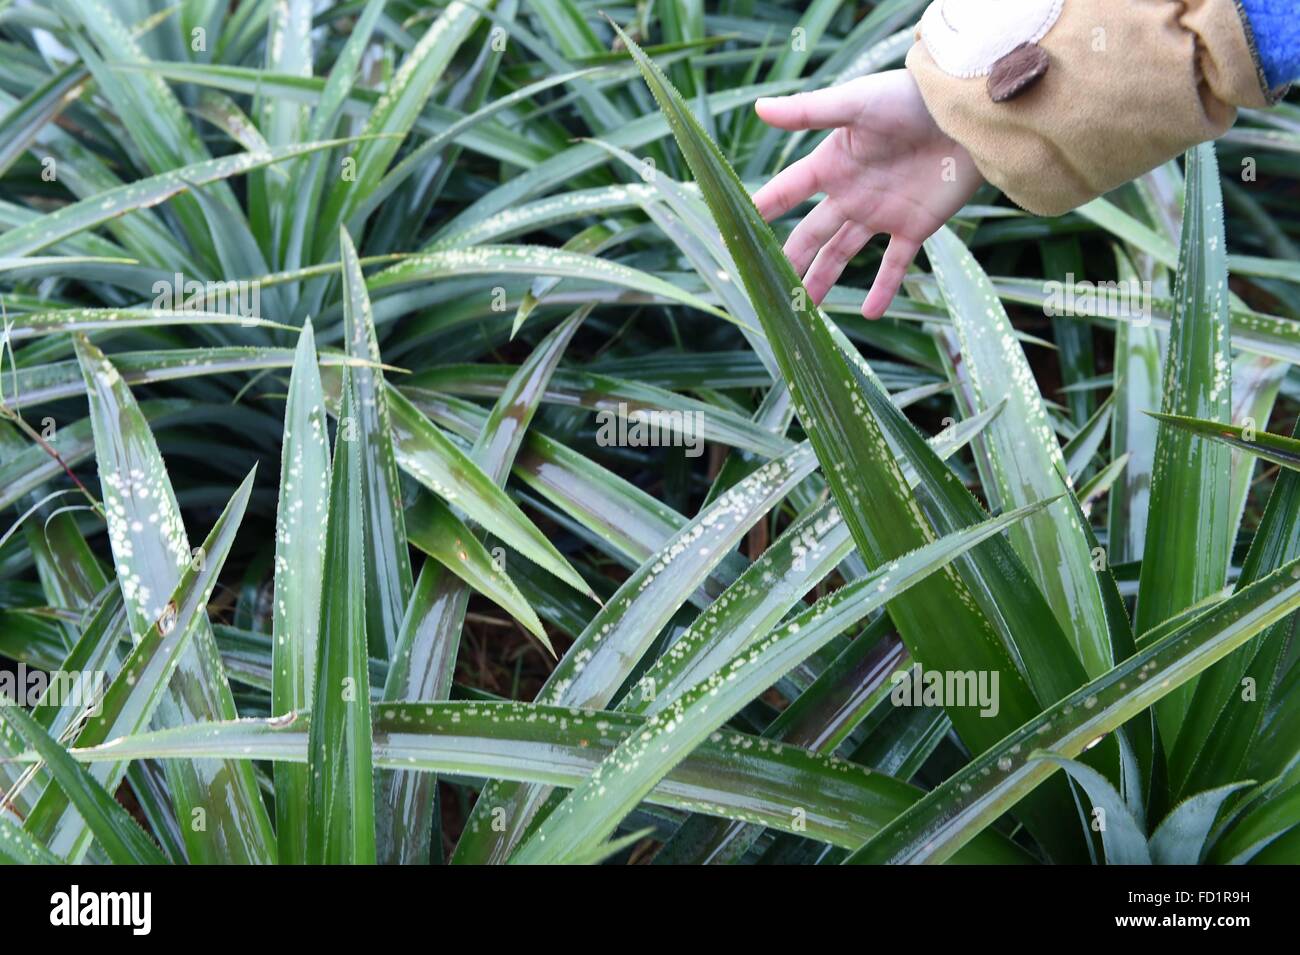 (160127) -- QINZHOU, Jan. 27, 2016 (Xinhua) -- An agricultural technician checks on frostbitten pineapple seedlings in Qinzhou, south China's Guangxi Zhuang Autonomous Region, Jan. 27, 2016. The freezing weather caused by cold wave in Qinzhou has caused damage to tropical crops introduced from southeast China's Taiwan.  (Xinhua/Zhou Hua)(wjq) Stock Photo